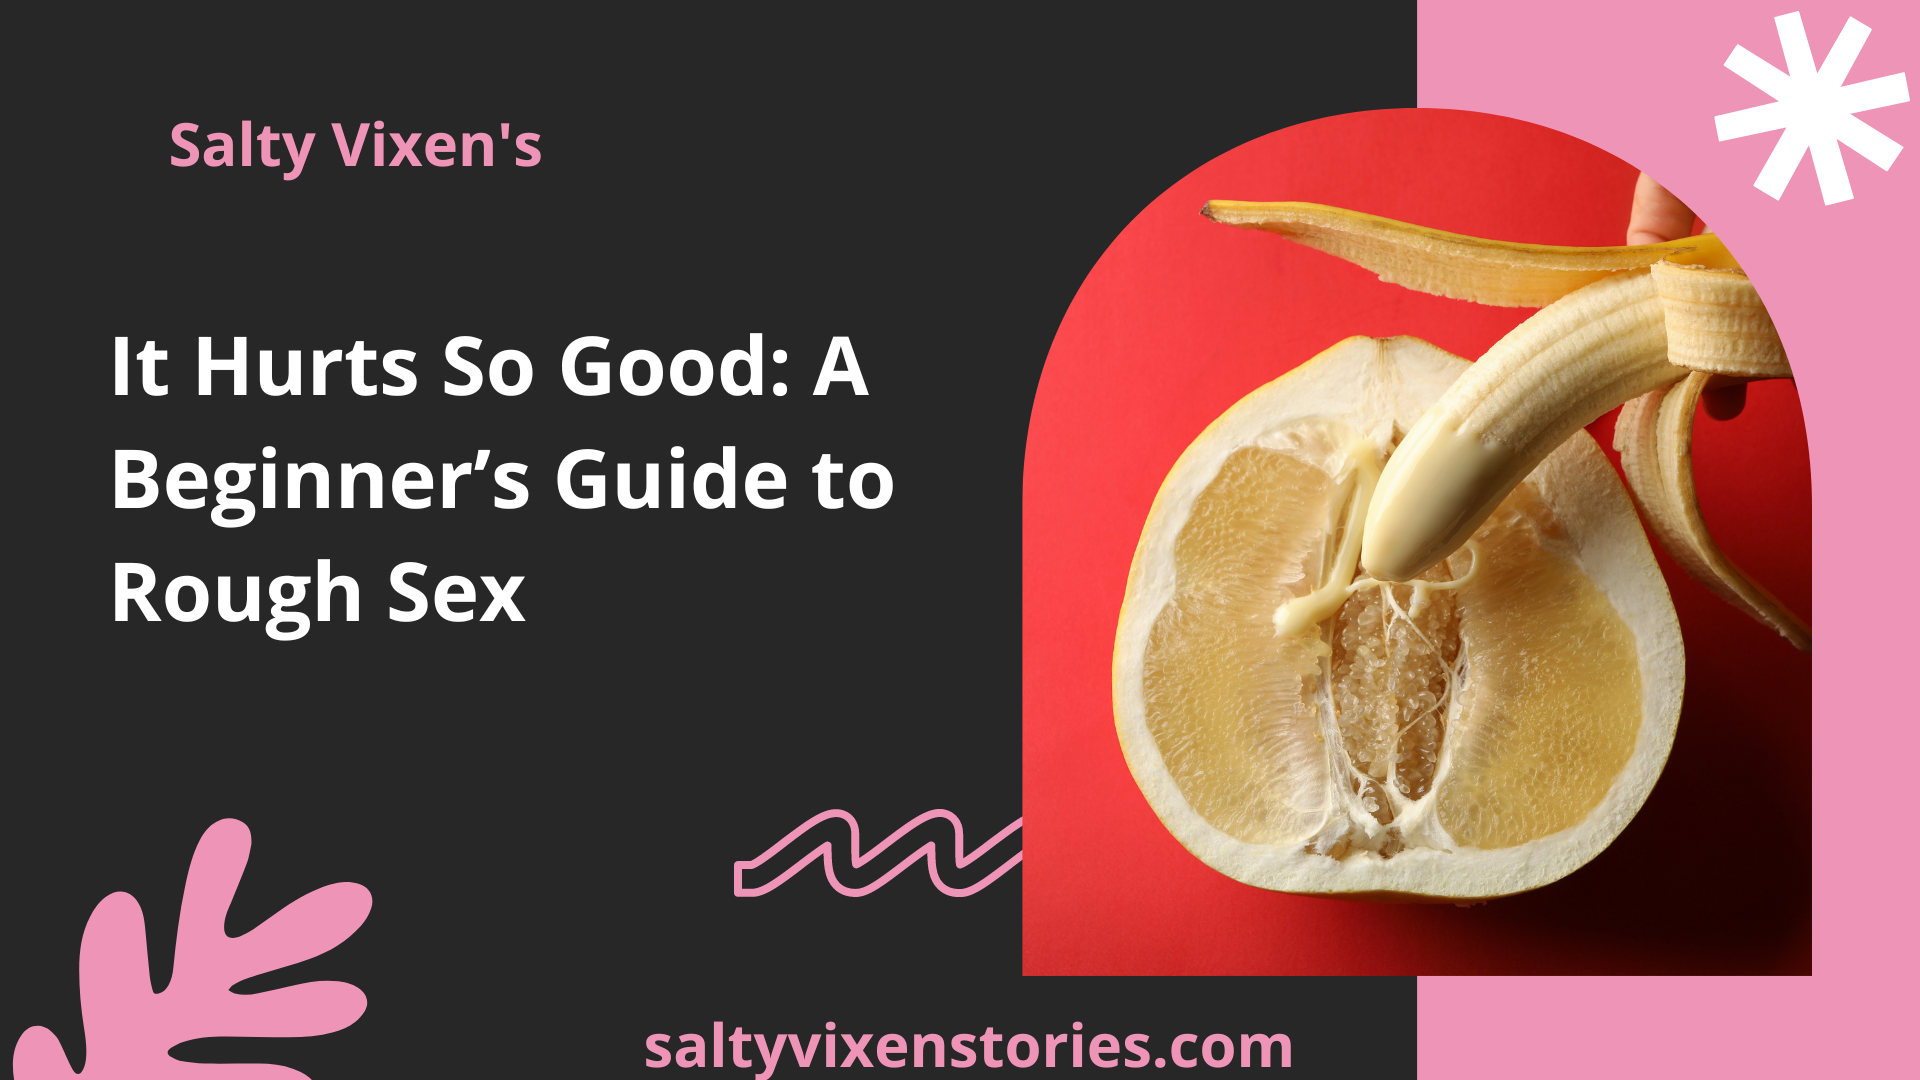 It Hurts So Good: A Beginner’s Guide to Rough Sex